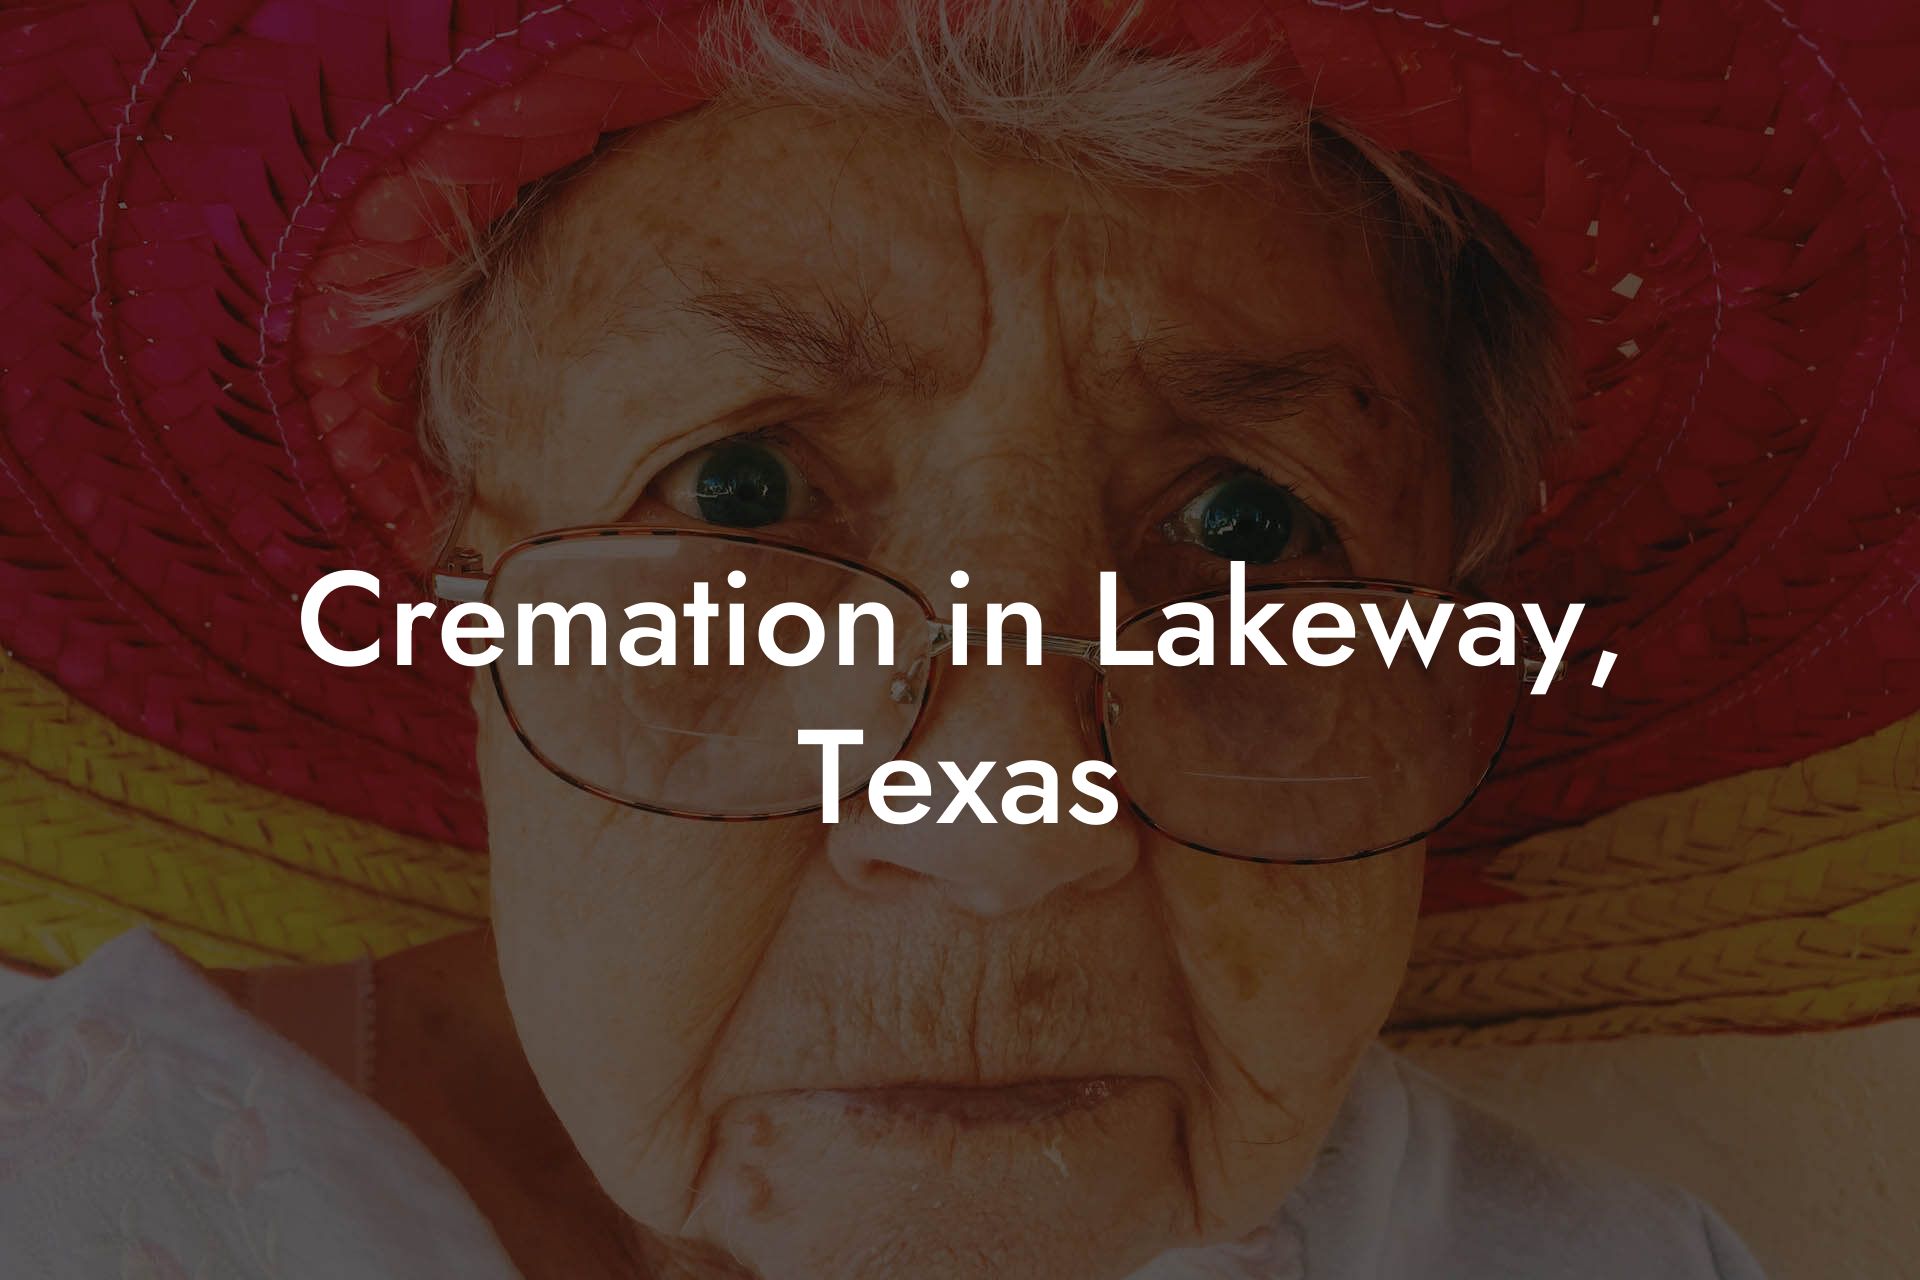 Cremation in Lakeway, Texas